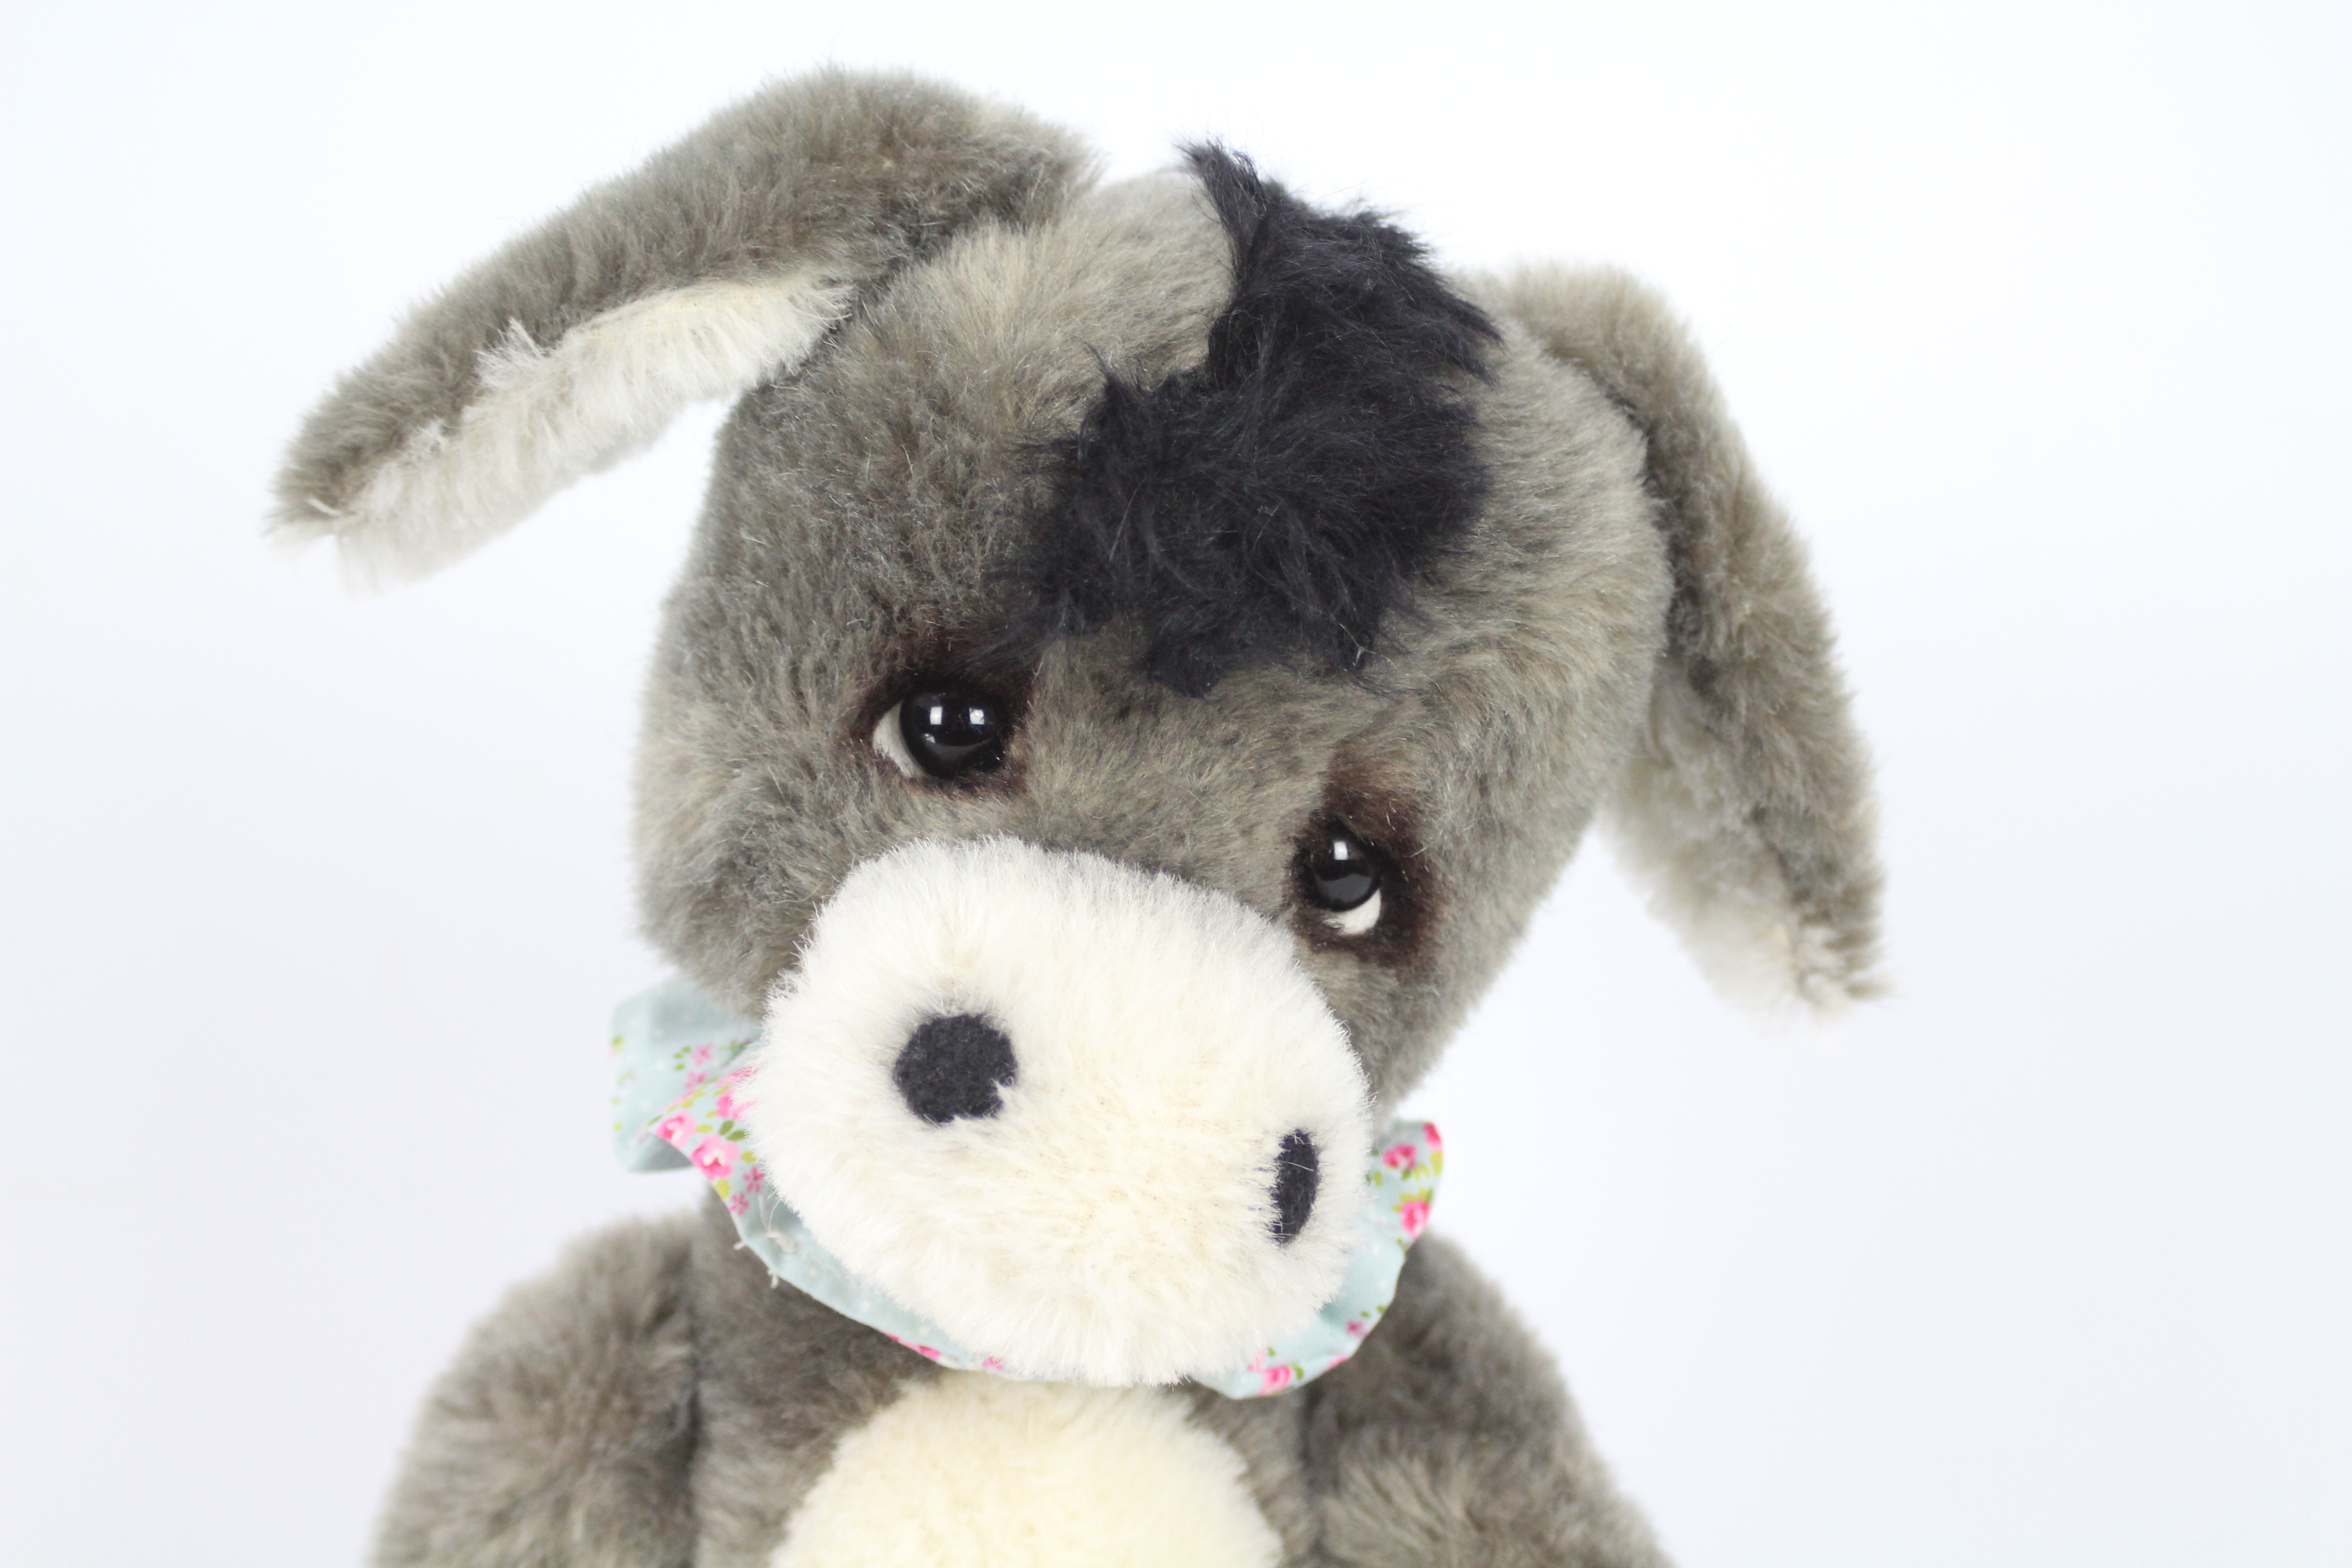 The Wild Things - A grey and black-coloured soft toy donkey. Donkey has glass eyes. - Image 2 of 7